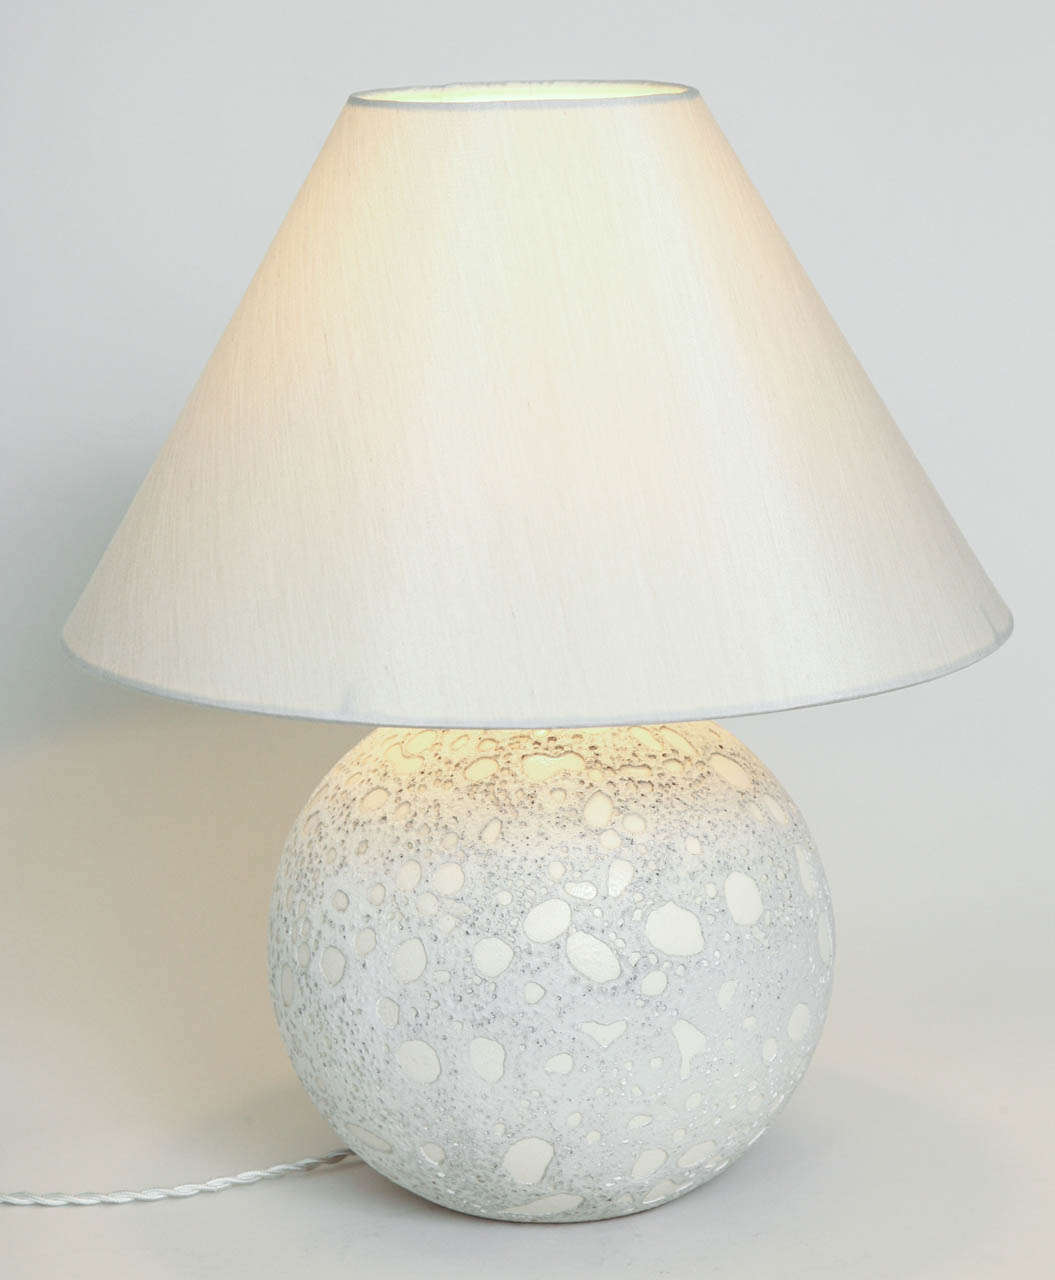 This spherical lamp base has a double lace effect with ivory enamel against a white background.
Has been rewired to U.S. standards.
Signed: 